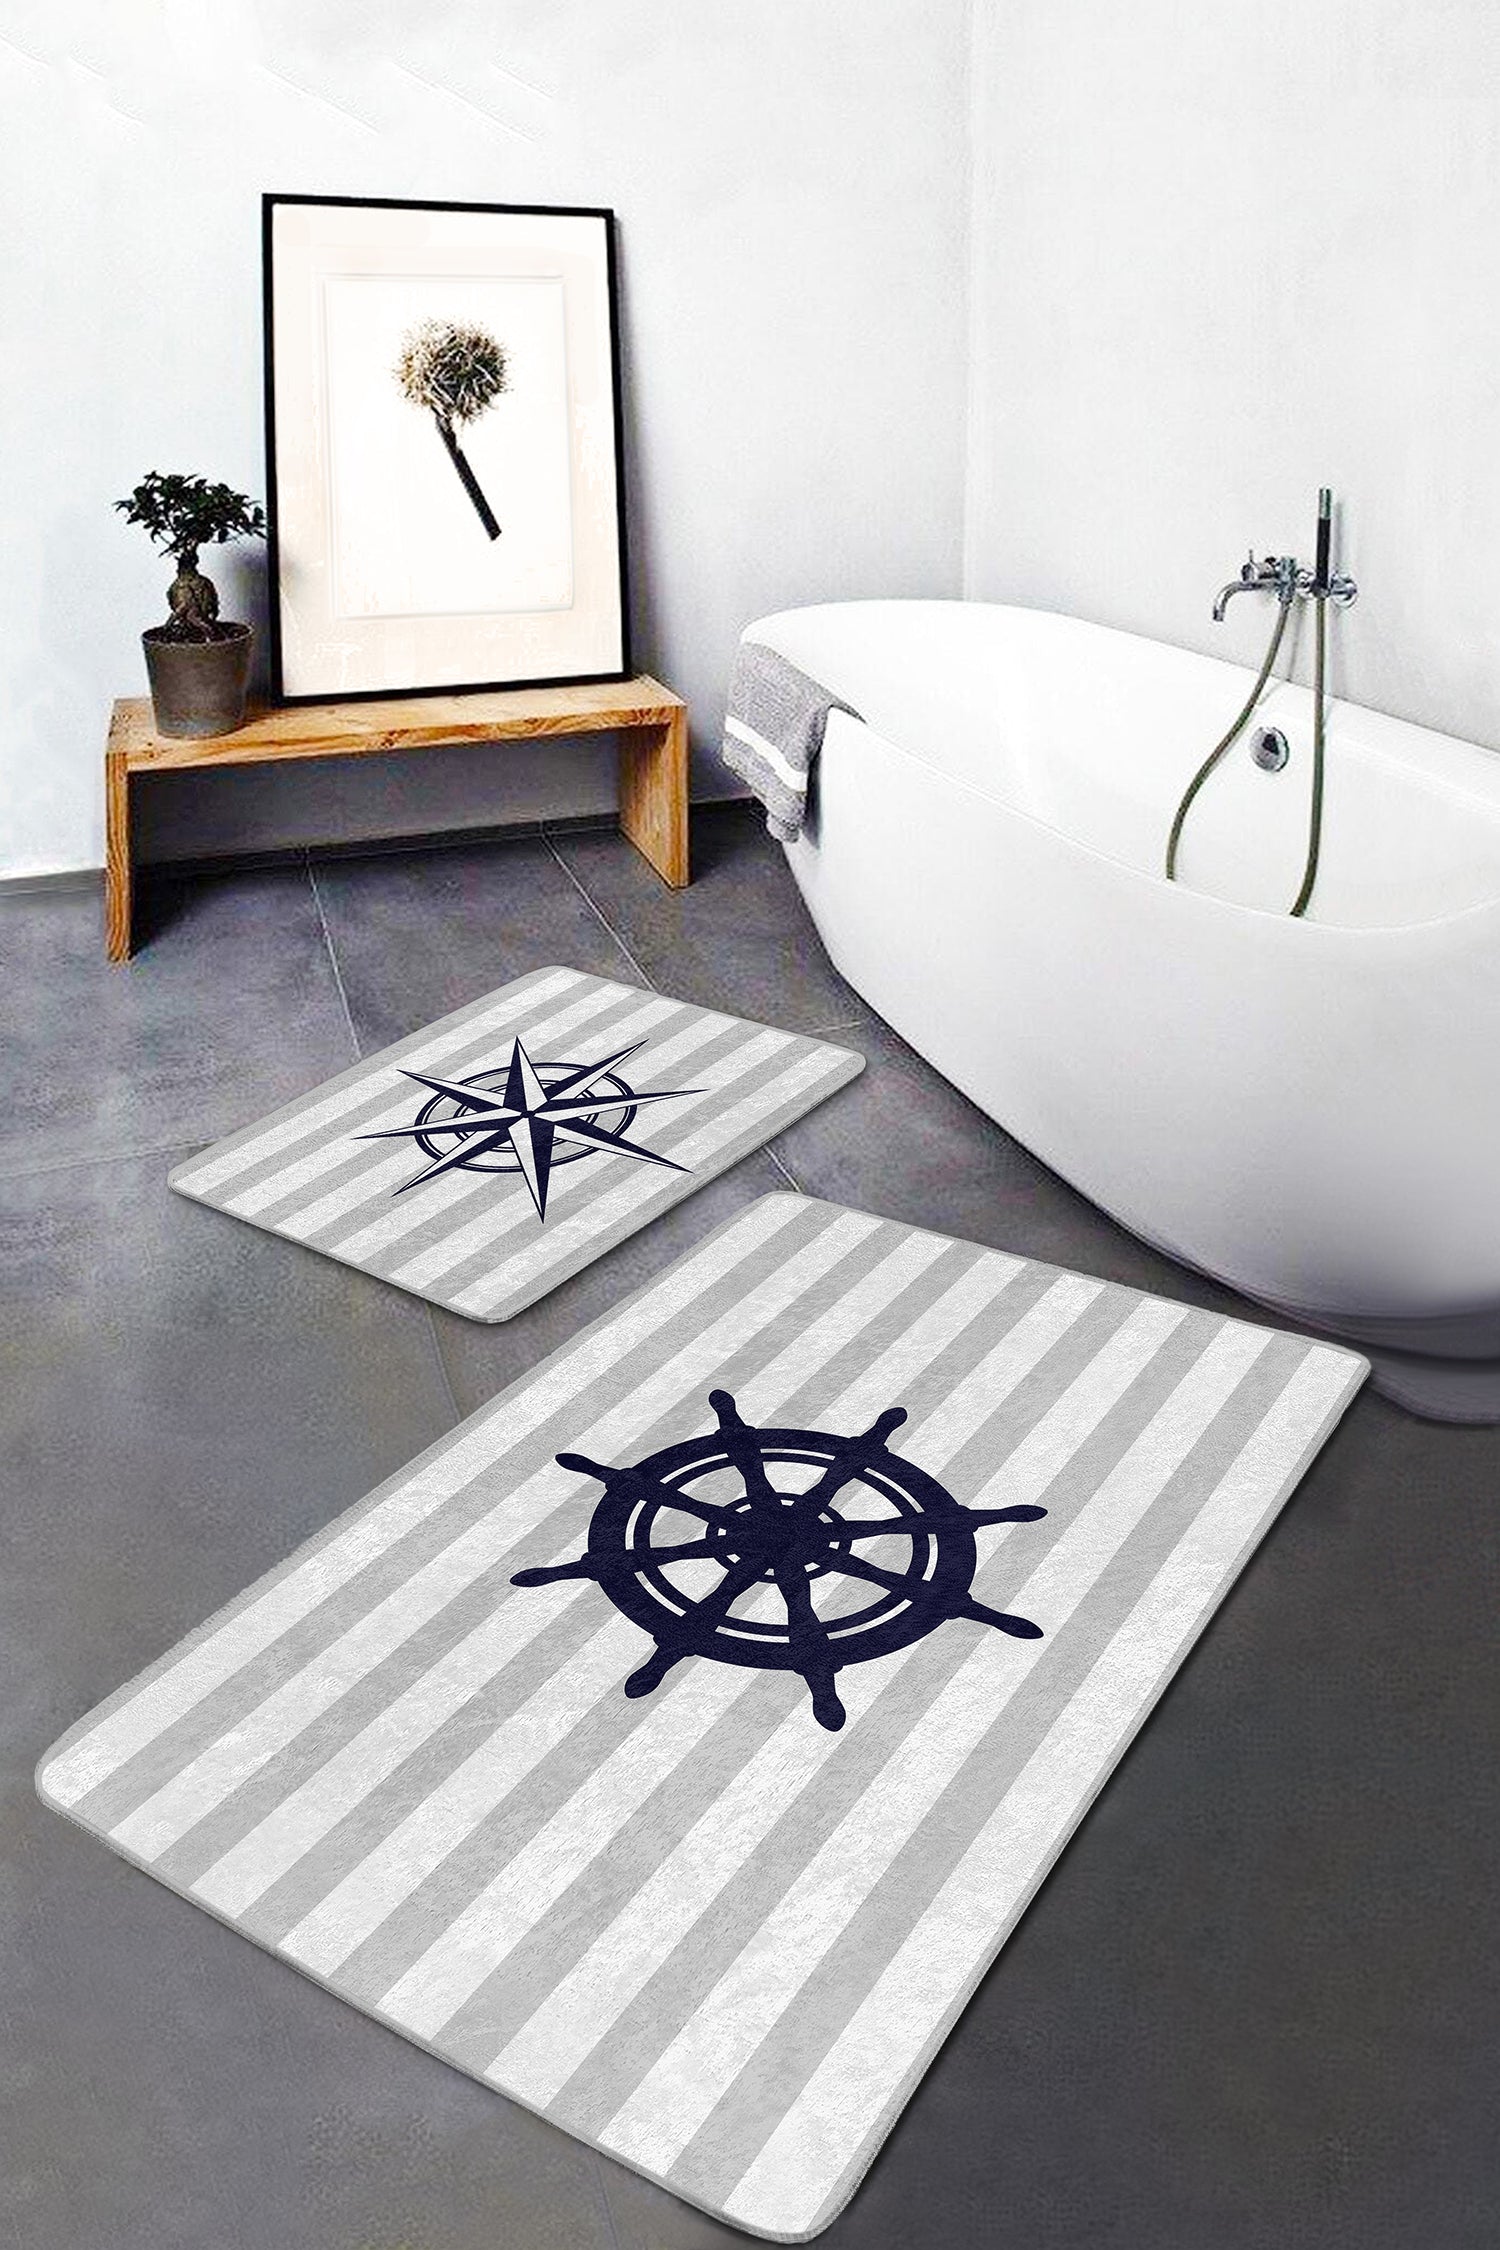 Decorative Bath Mat Set with a Charming Array of Compass and Boat Patterns